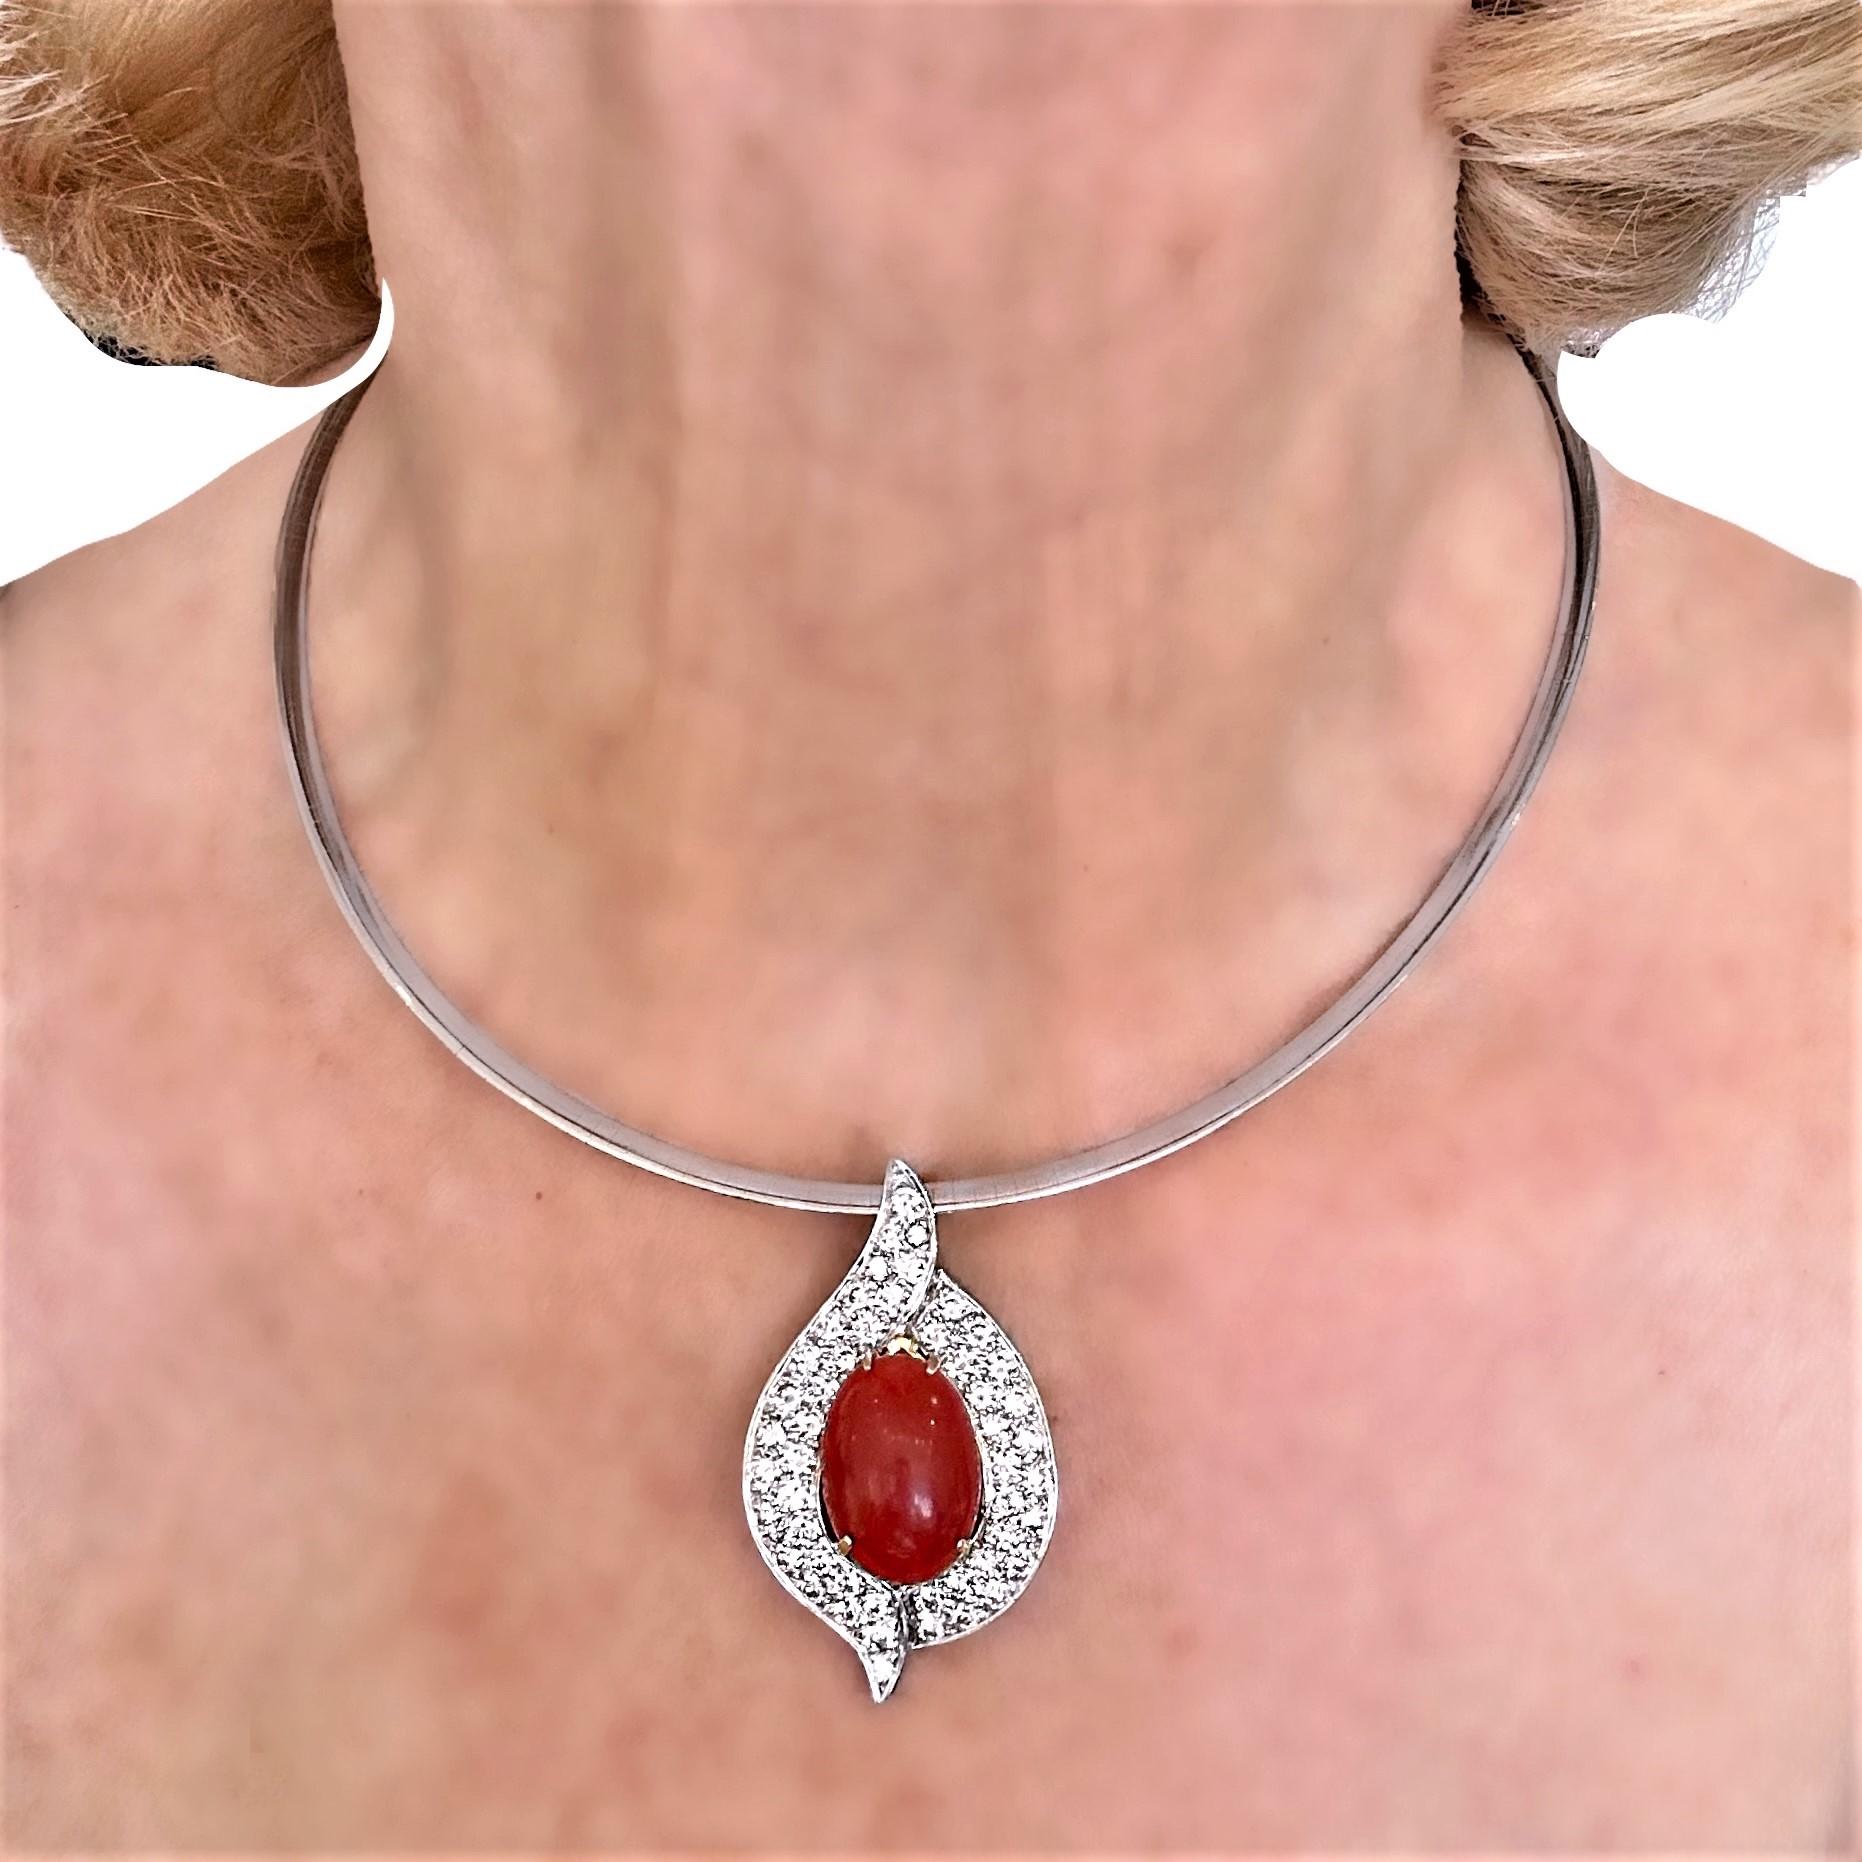 Dramatic 18k Coral & Diamond Pendant By Emis Beros Shown on an Omega Choker For Sale 5